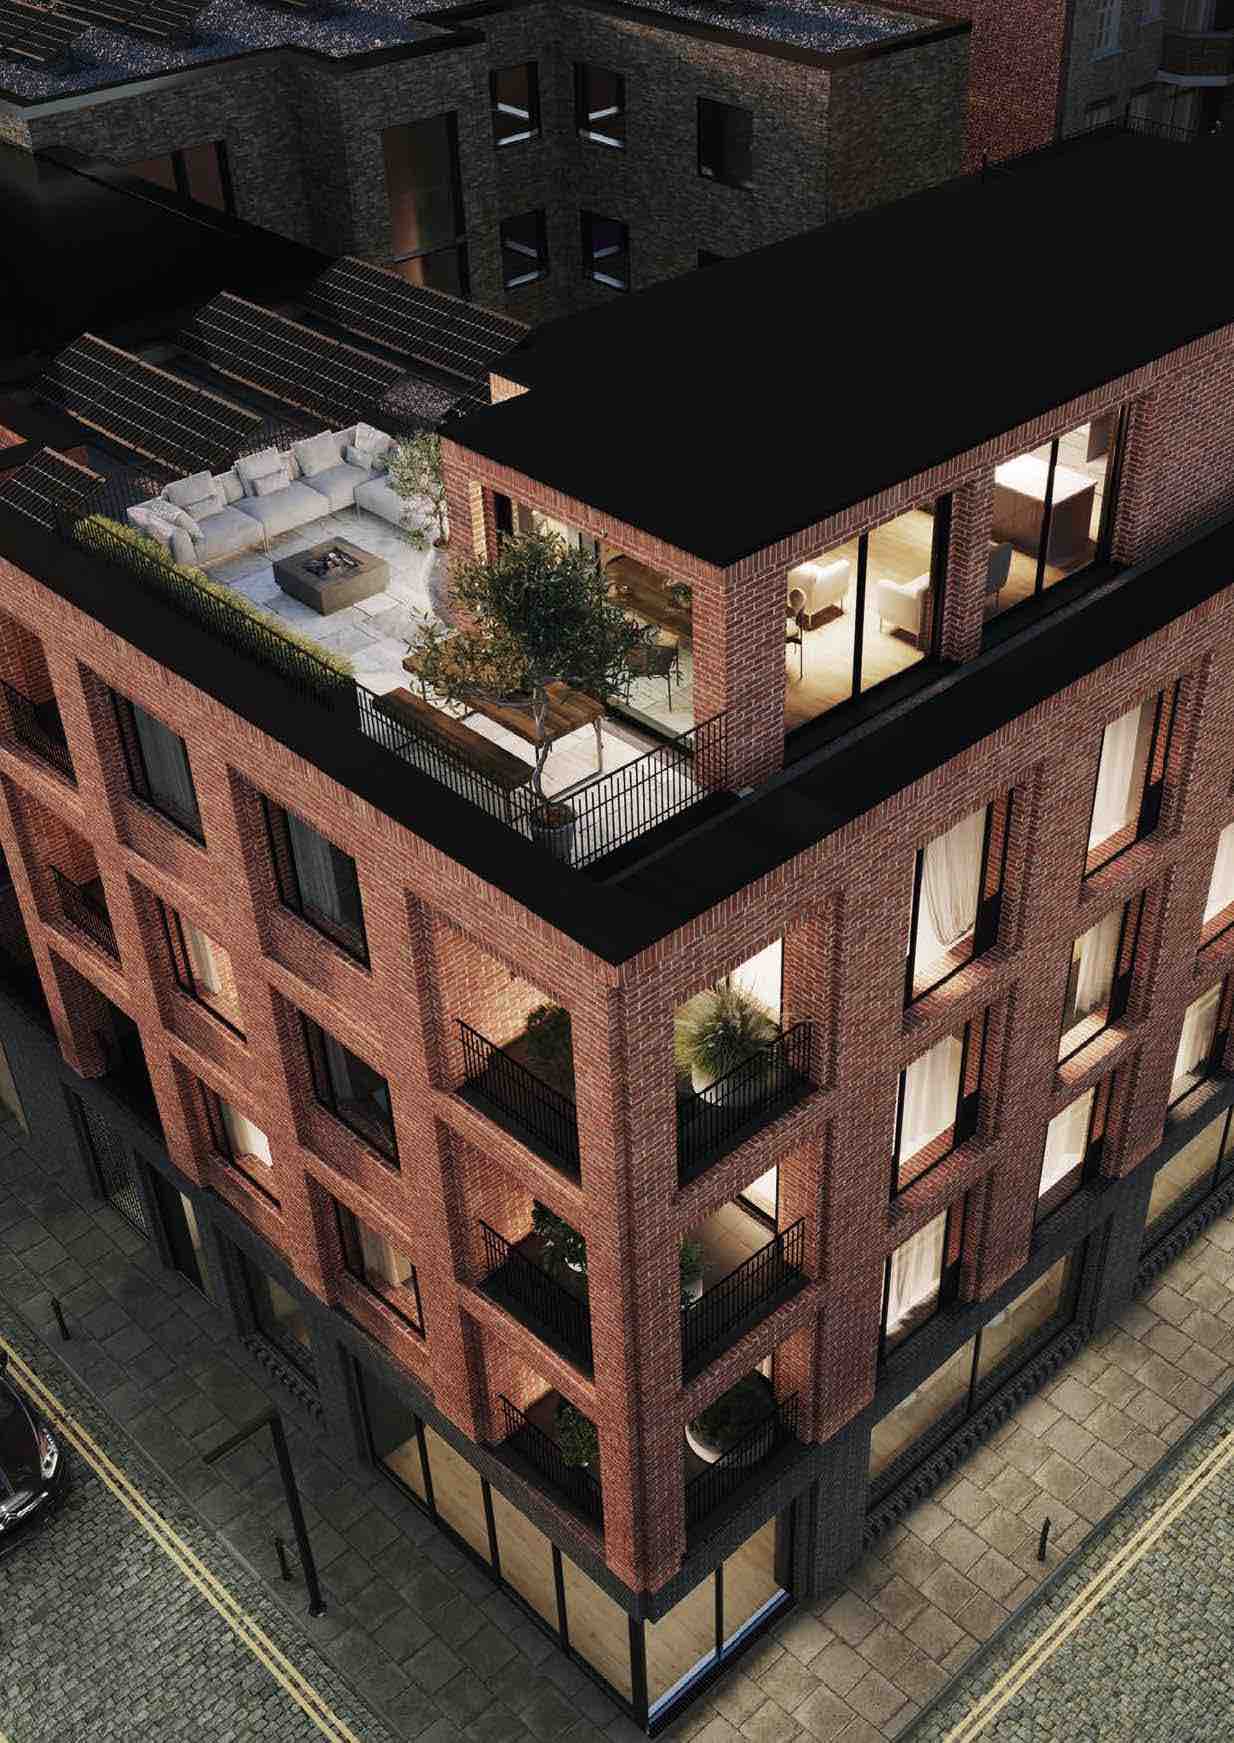 Nine luxury apartments & commercial space for Chalk Farm, NW1